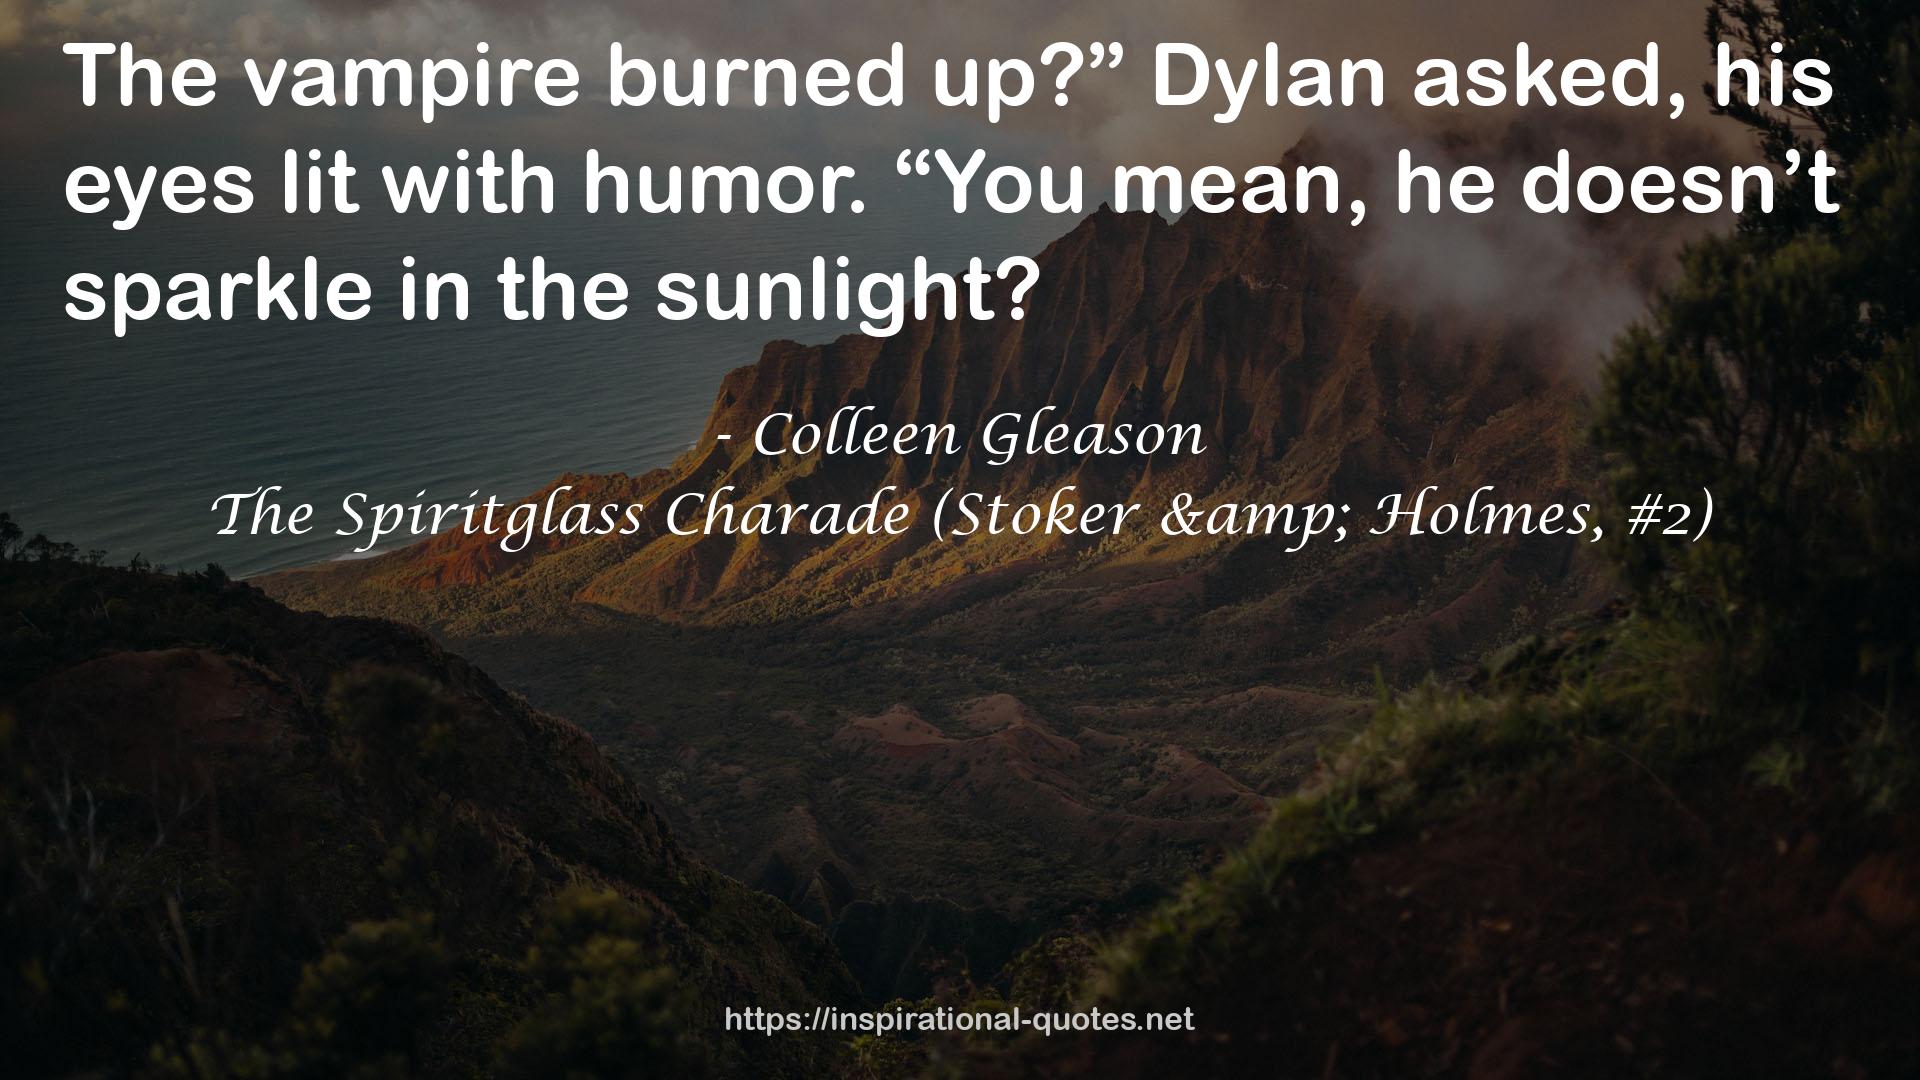 The Spiritglass Charade (Stoker & Holmes, #2) QUOTES